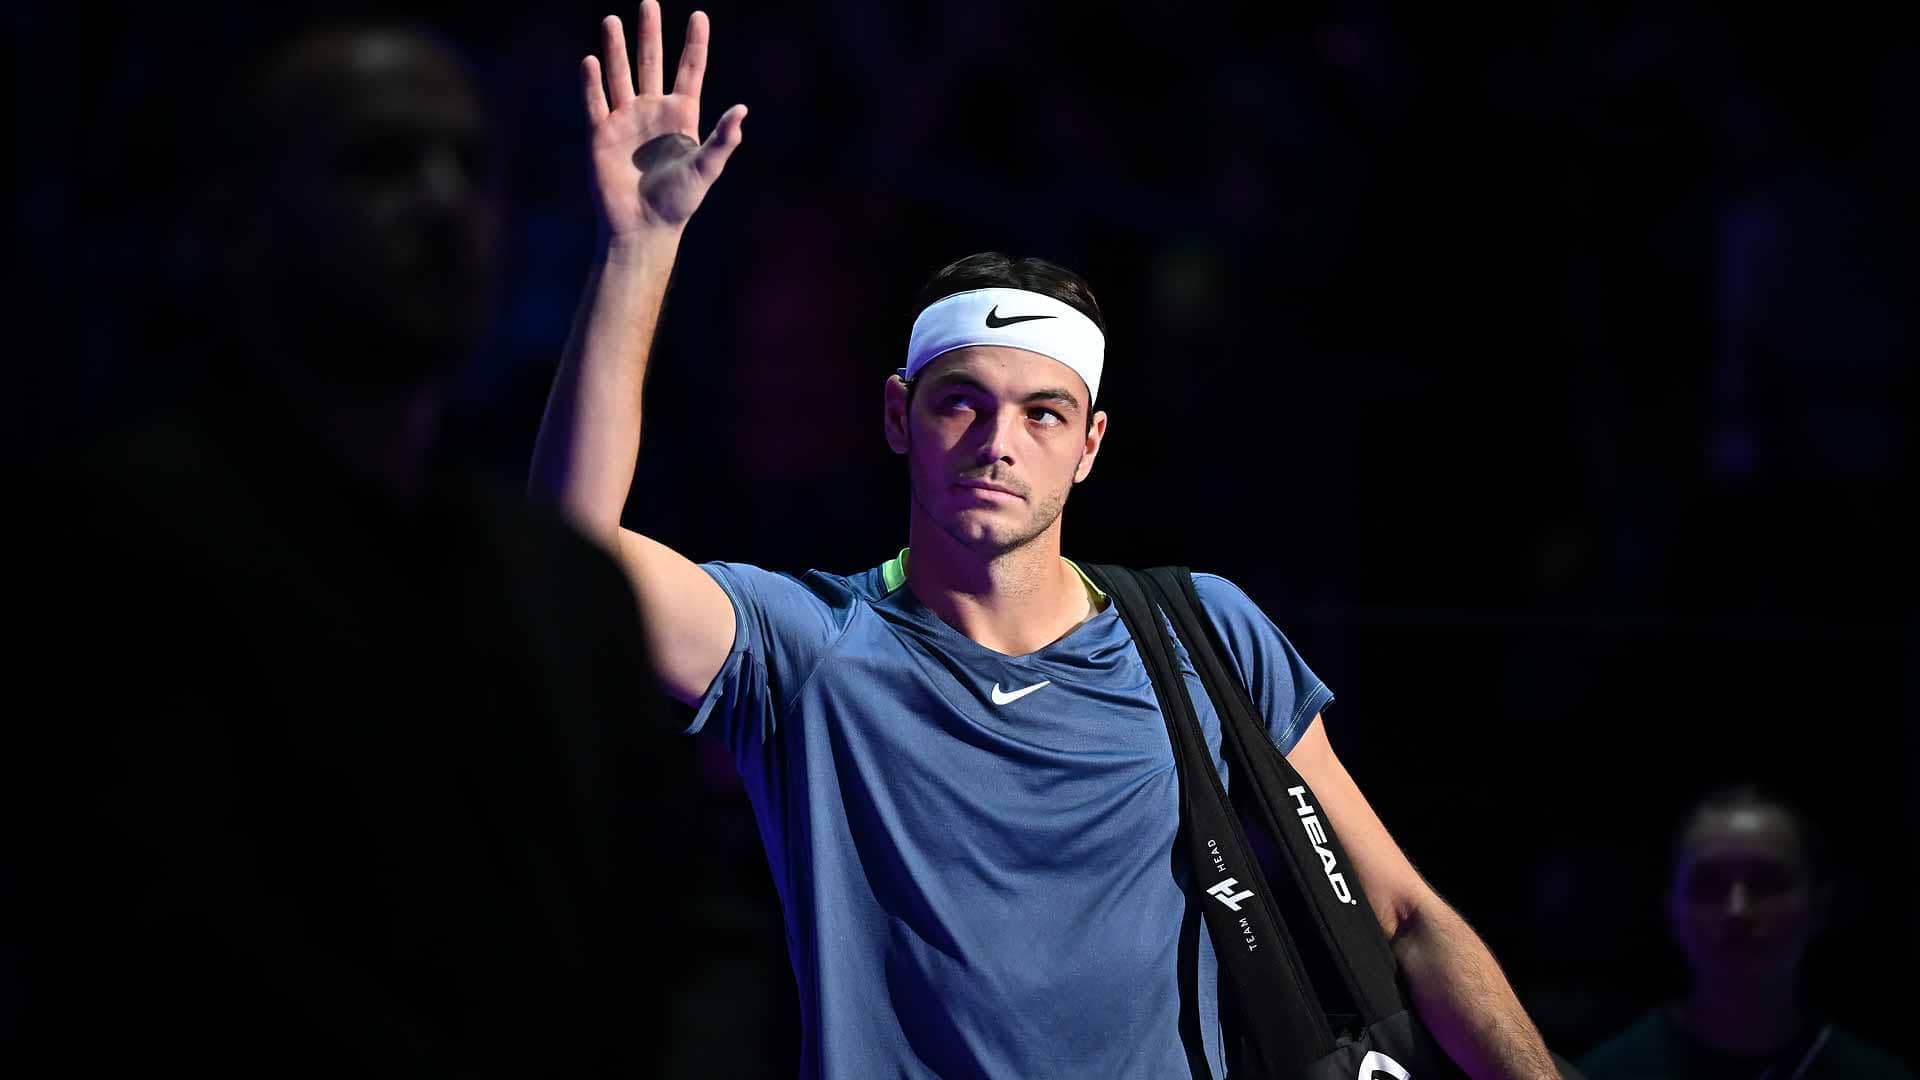 Taylor Fritz will not take the court for his second-round Rolex Paris Masters match.